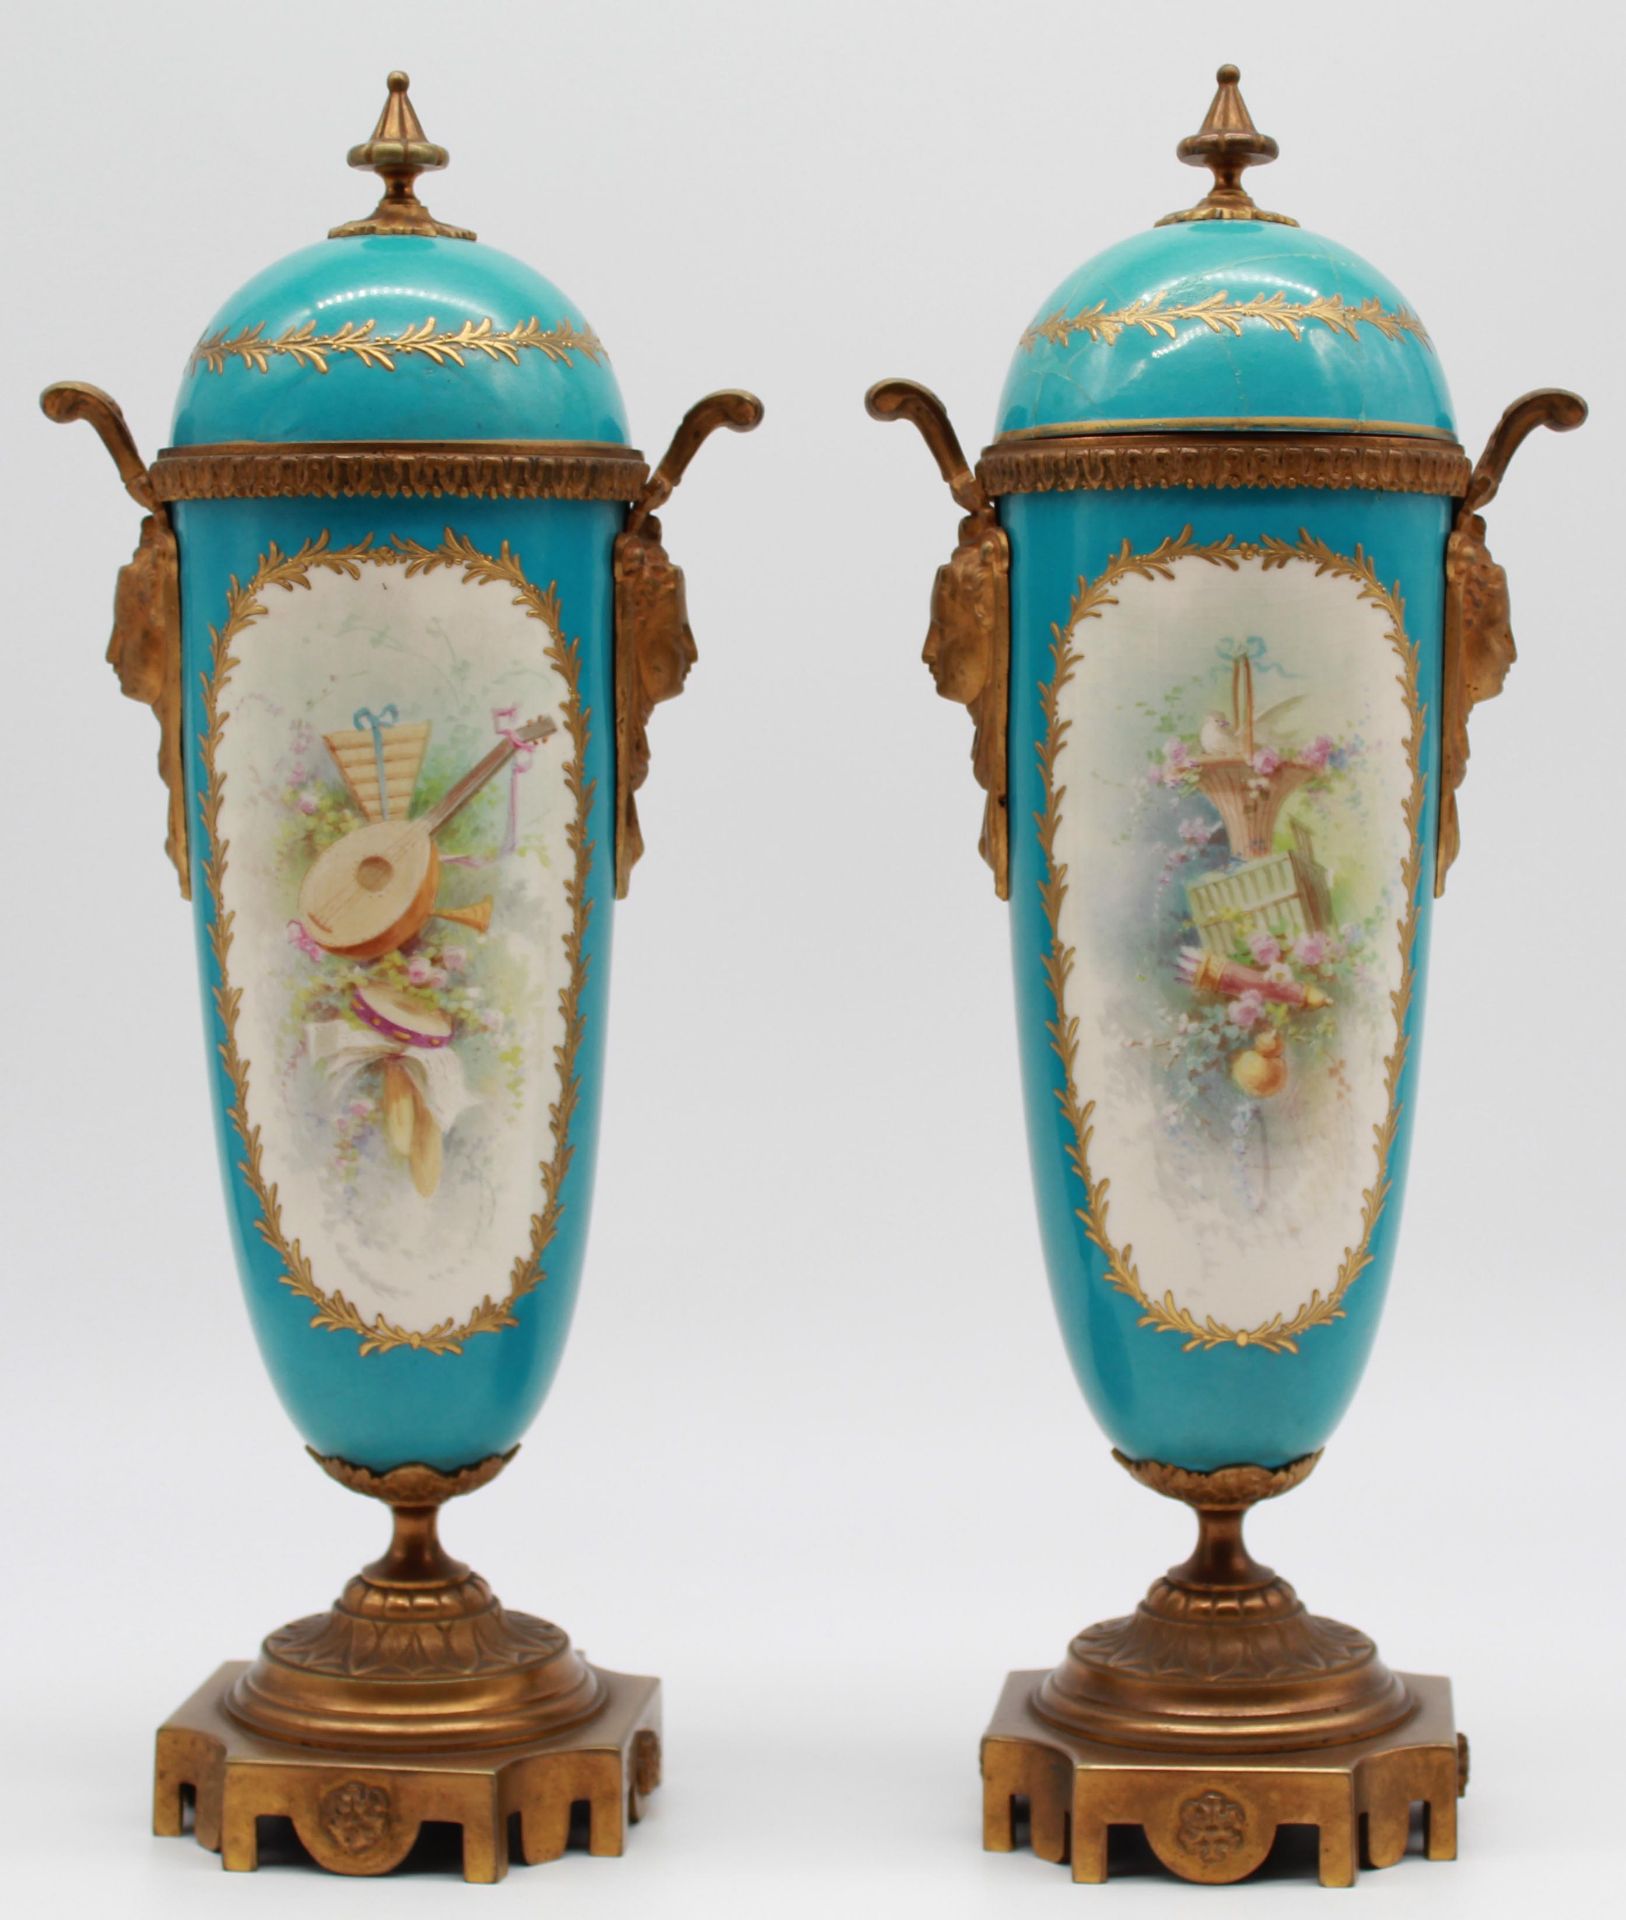 Two lidded cups around 1900. Porcelain. With "bronze dore" mounts. - Image 6 of 12